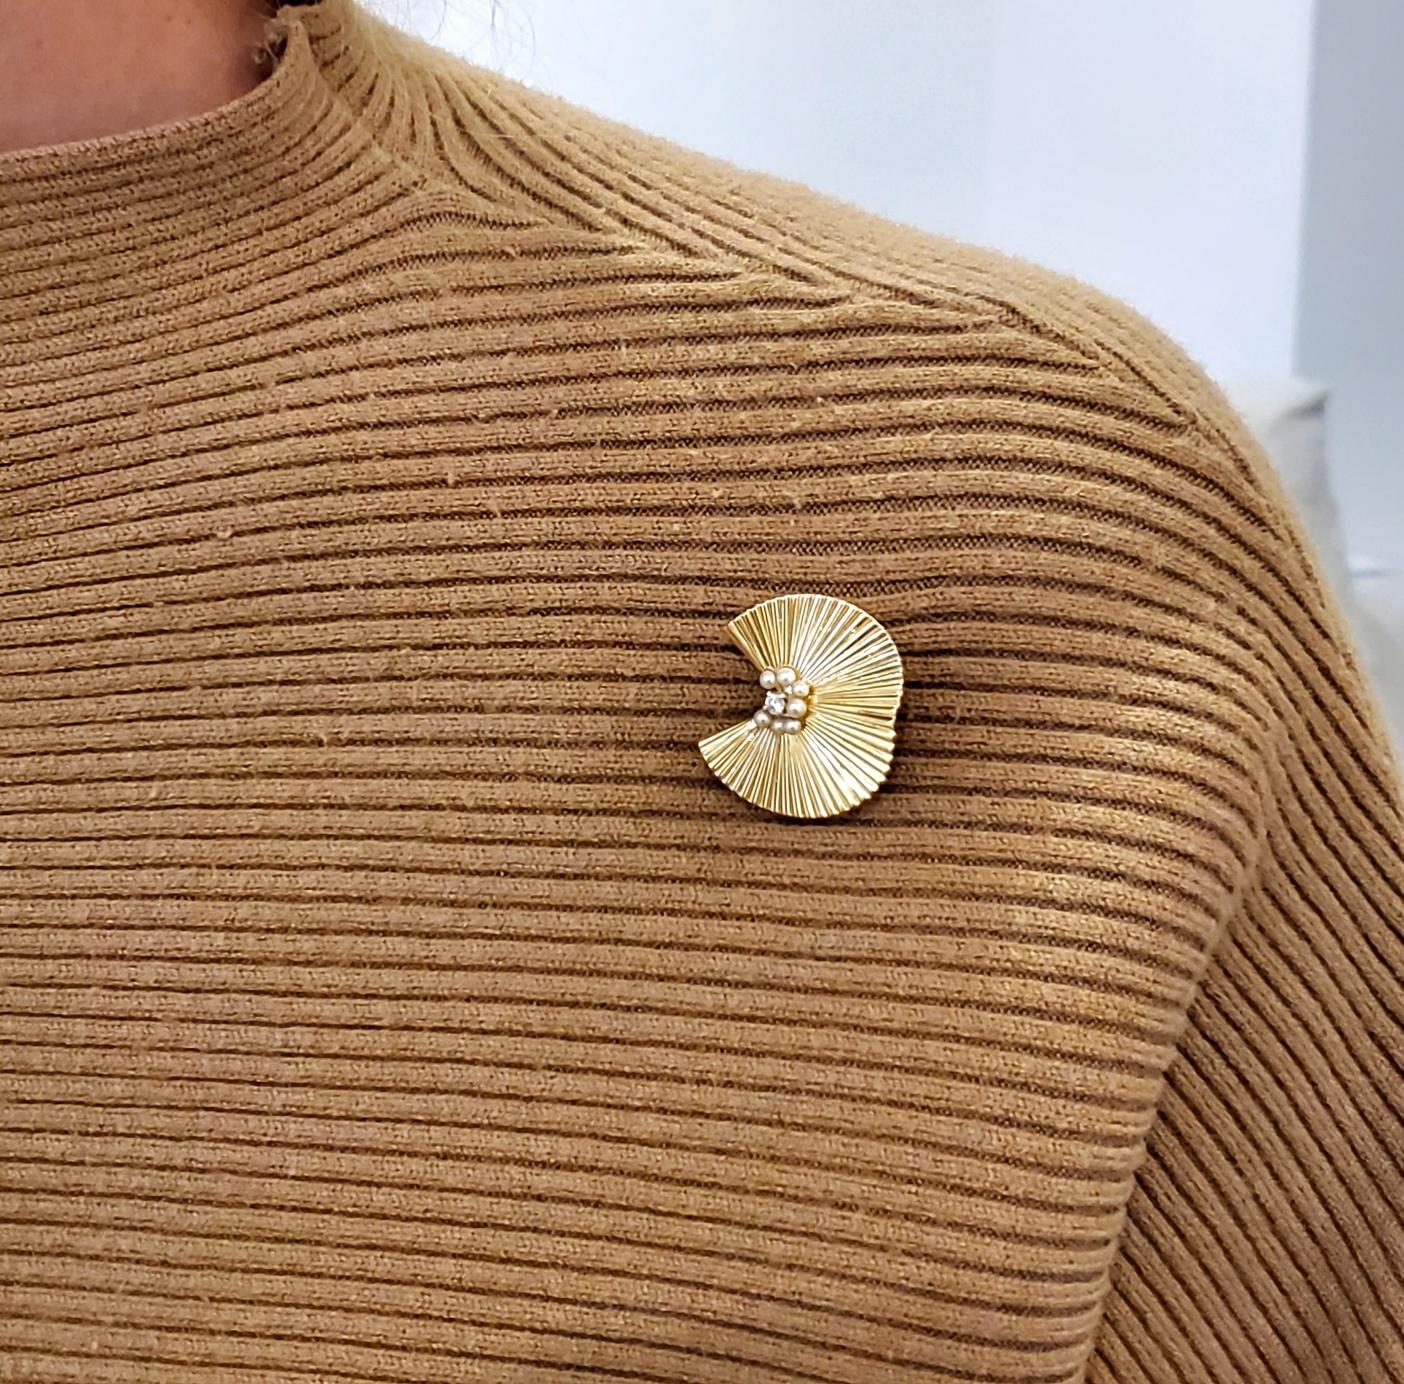 A brooch designed by George Schuler for Tiffany & Co.

A beautiful brooch, created in New York city by George Schuler for Tiffany & Co., back in the 1960. This piece has been crafted with an undulate fan shape in solid yellow gold of 14 karats with